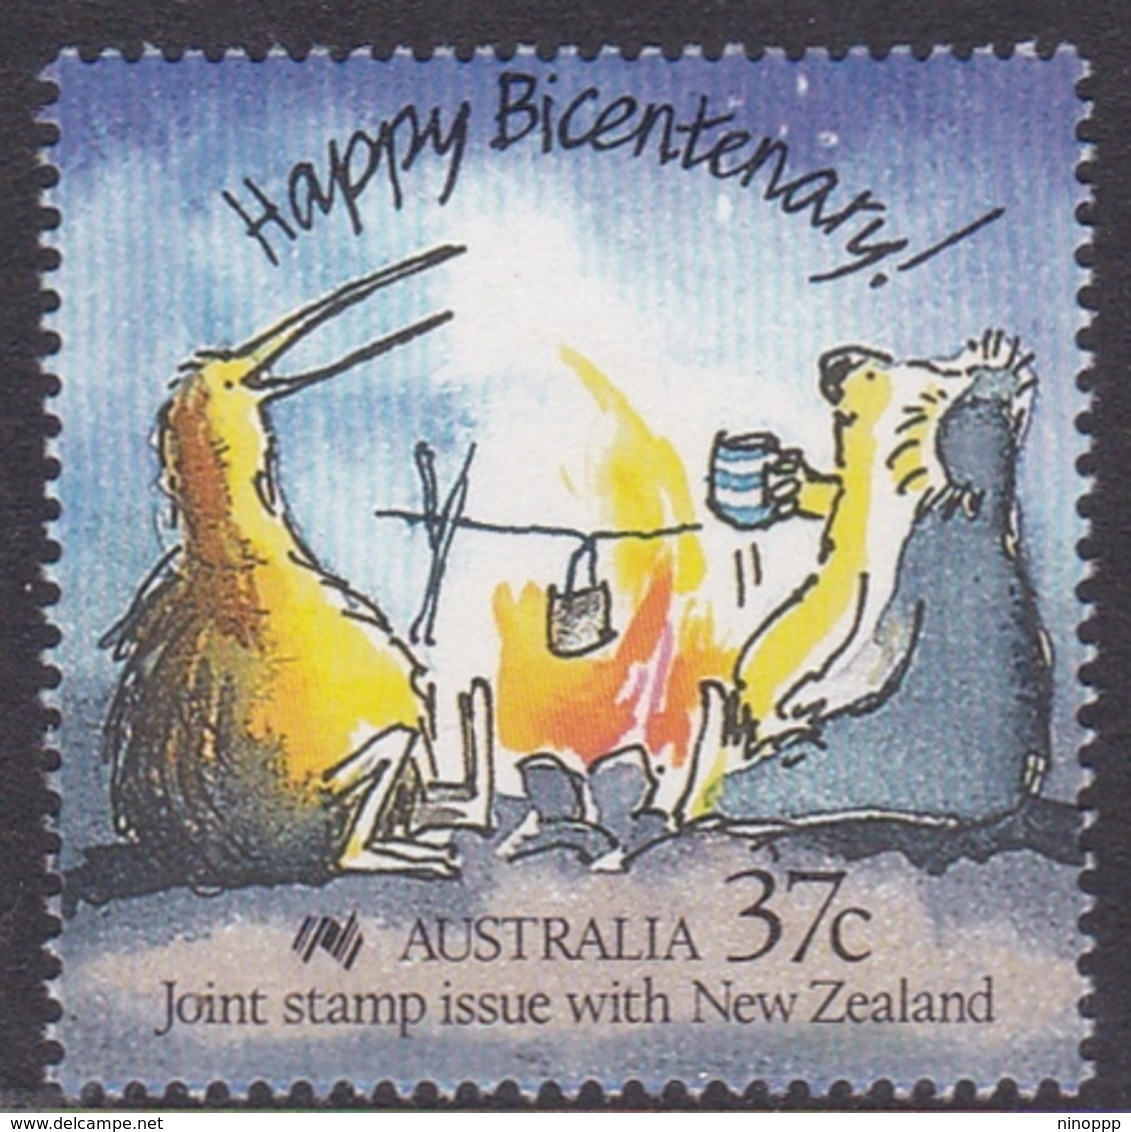 Australia ASC 1159 1988 Joint Bicentennial Issue With New Zealand, Mint Never Hinged - Mint Stamps